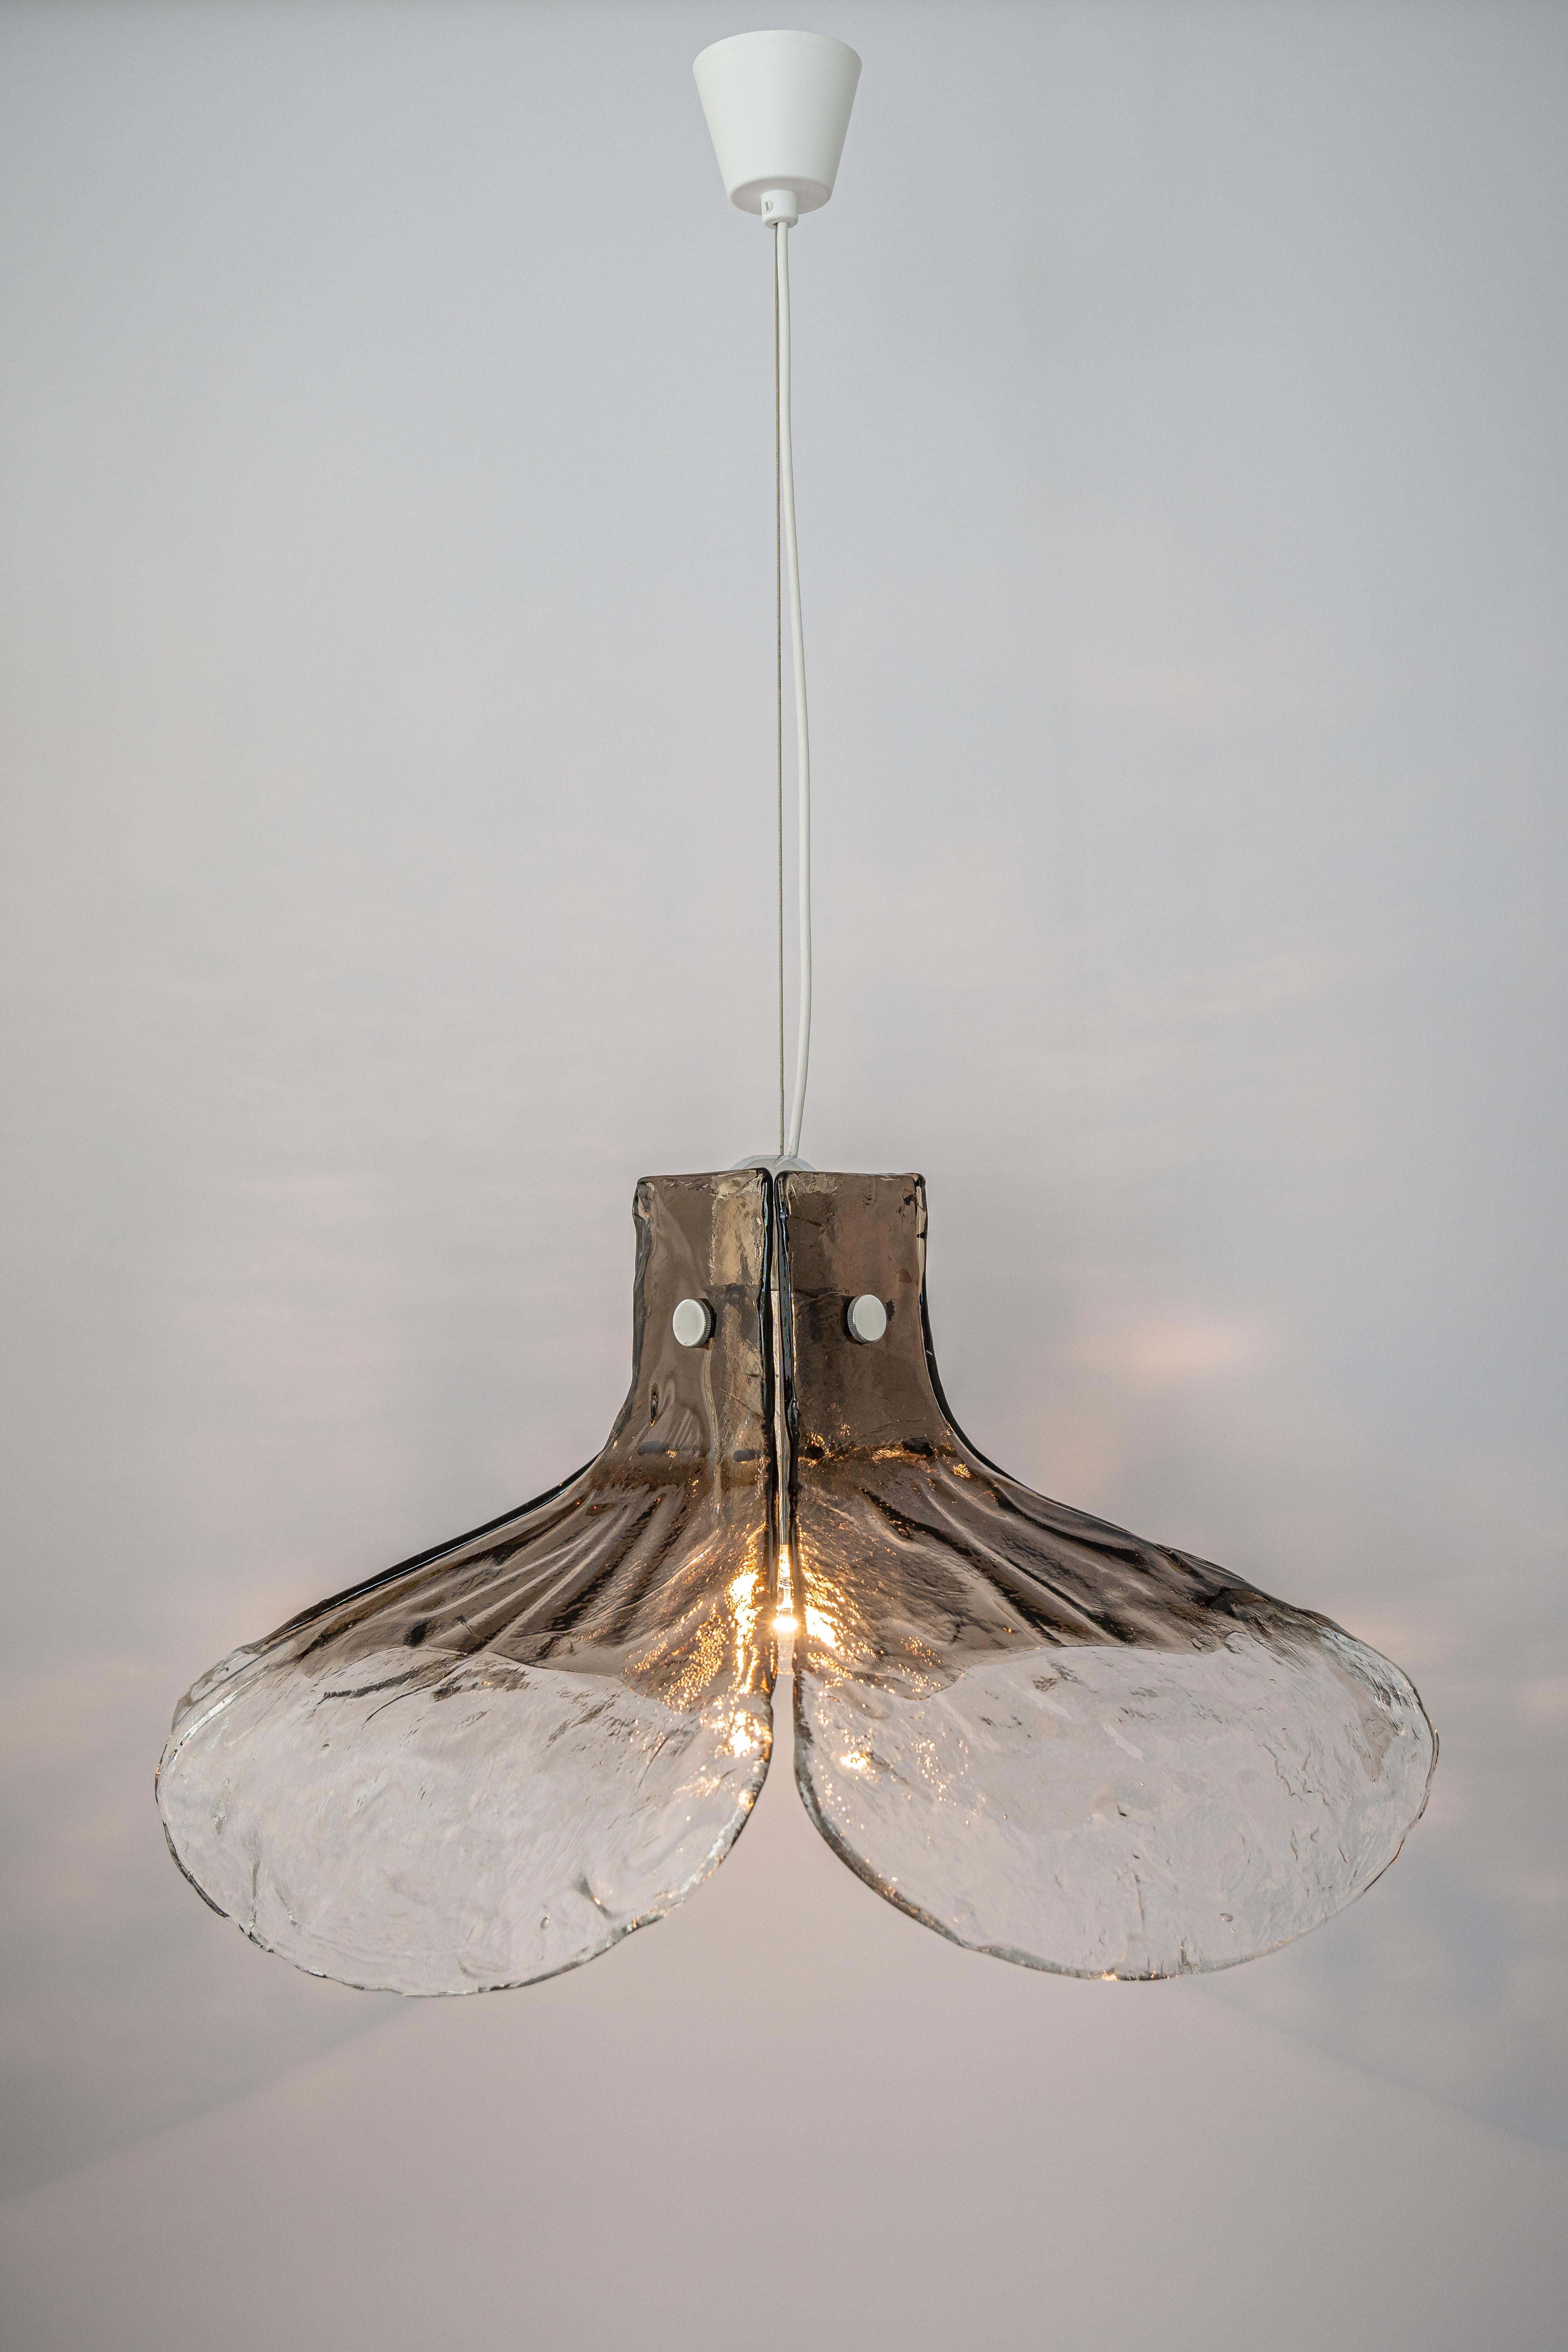 Mid-Century Modern 1 of 2 Murano Glass Chandelier Designed by Carlo Nason for Kalmar, Germany, 60s For Sale